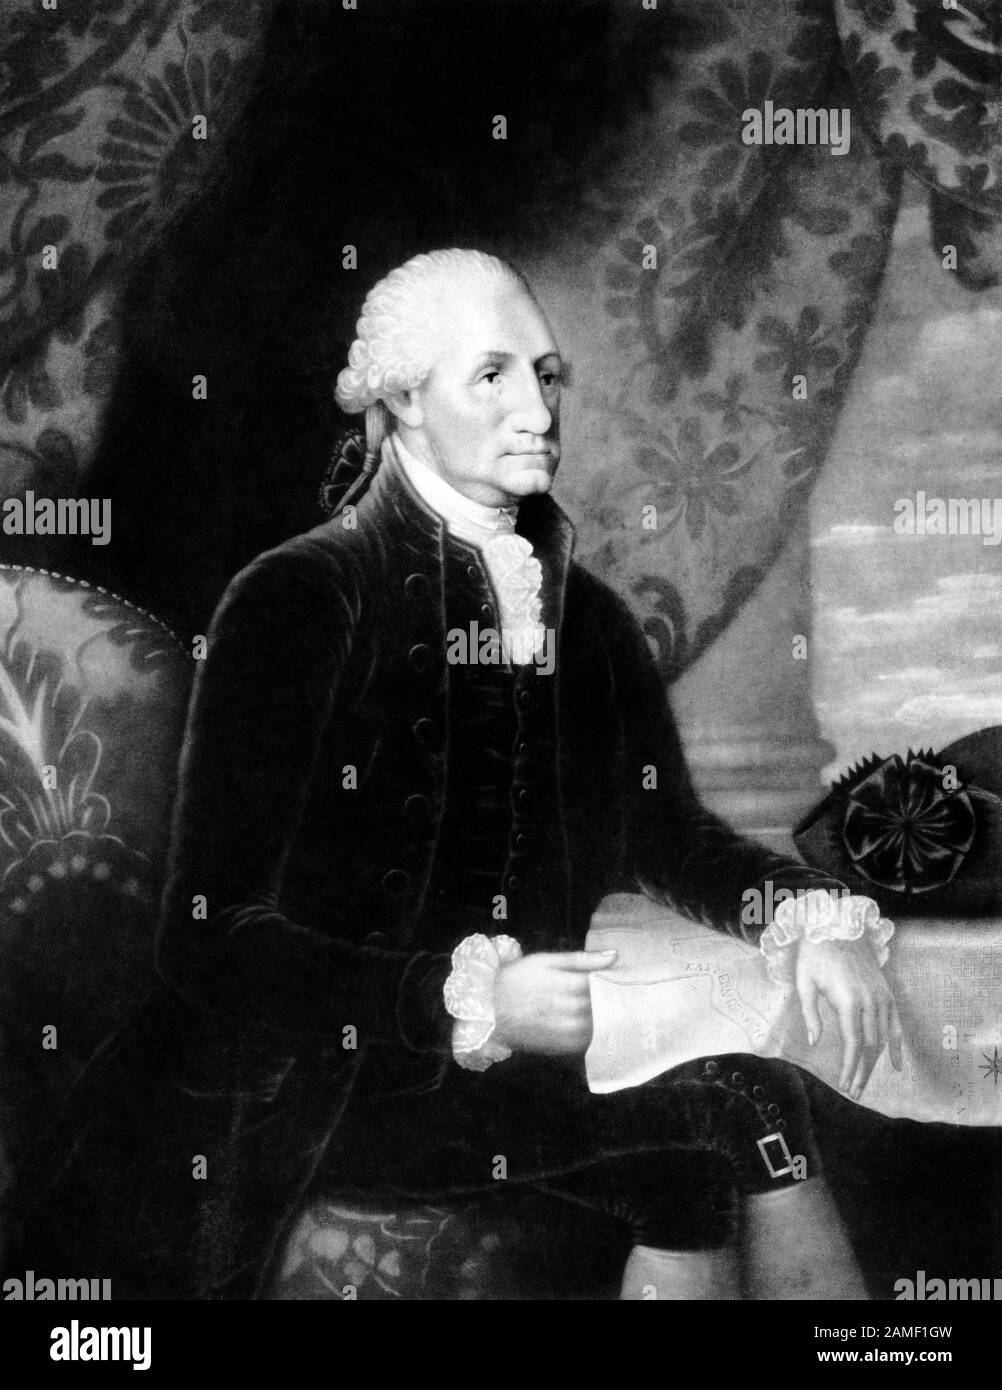 Vintage portrait of George Washington (1732 - 1799) – Commander of the Continental Army in the American Revolutionary War / War of Independence (1775 – 1783) and the first US President (1789 - 1797). The 1793 print, from a painting by artist Edward Savage (1761 – 1817), depicts a seated Washington holding proposed plans for the new capital city which would be named after him. Stock Photo